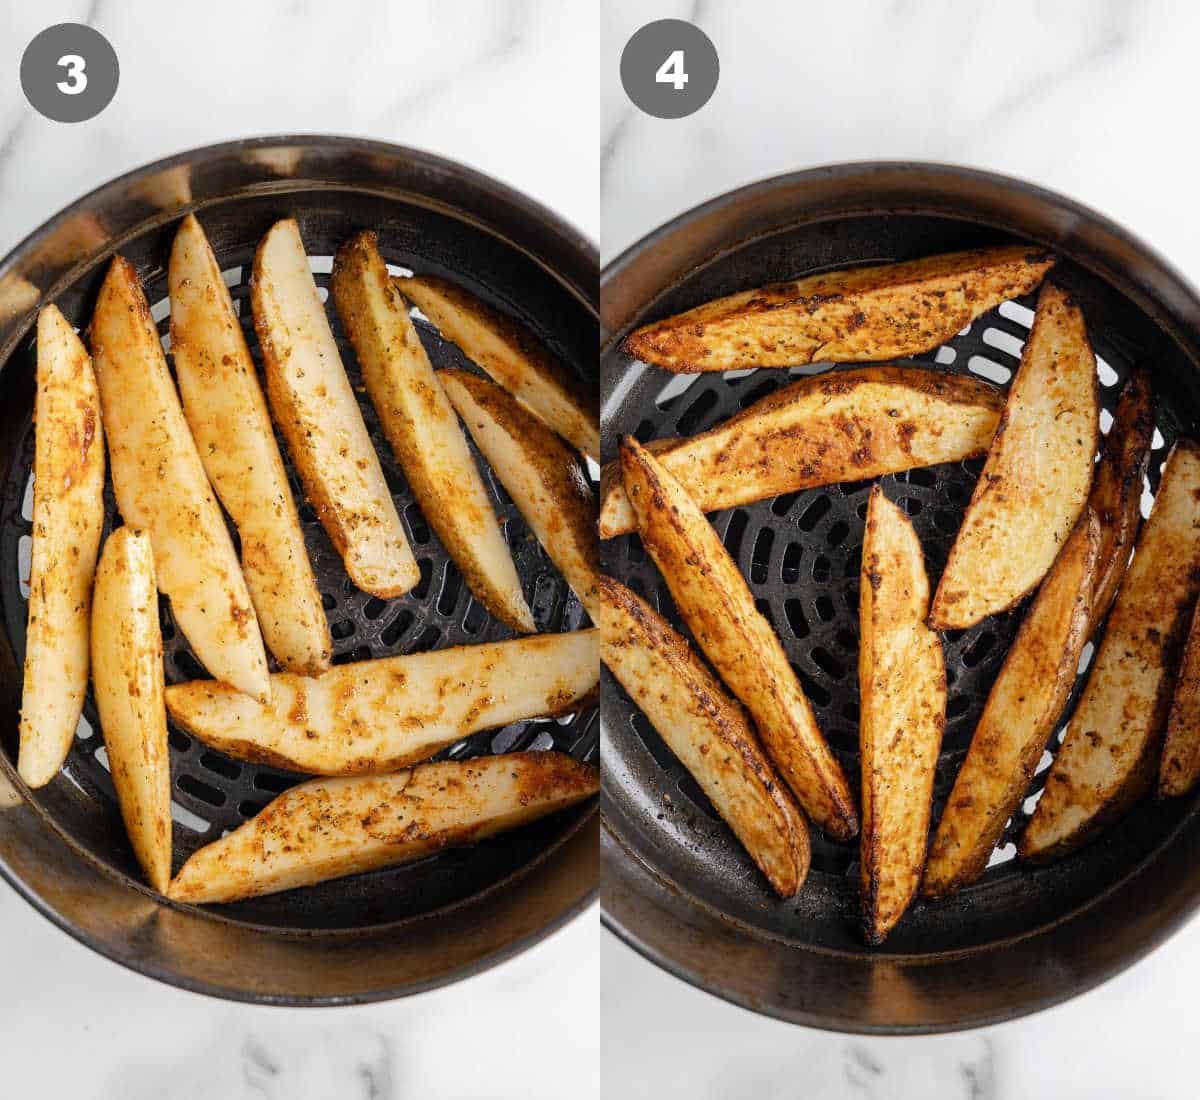 Potato wedges placed into an air fryer basket and fried.